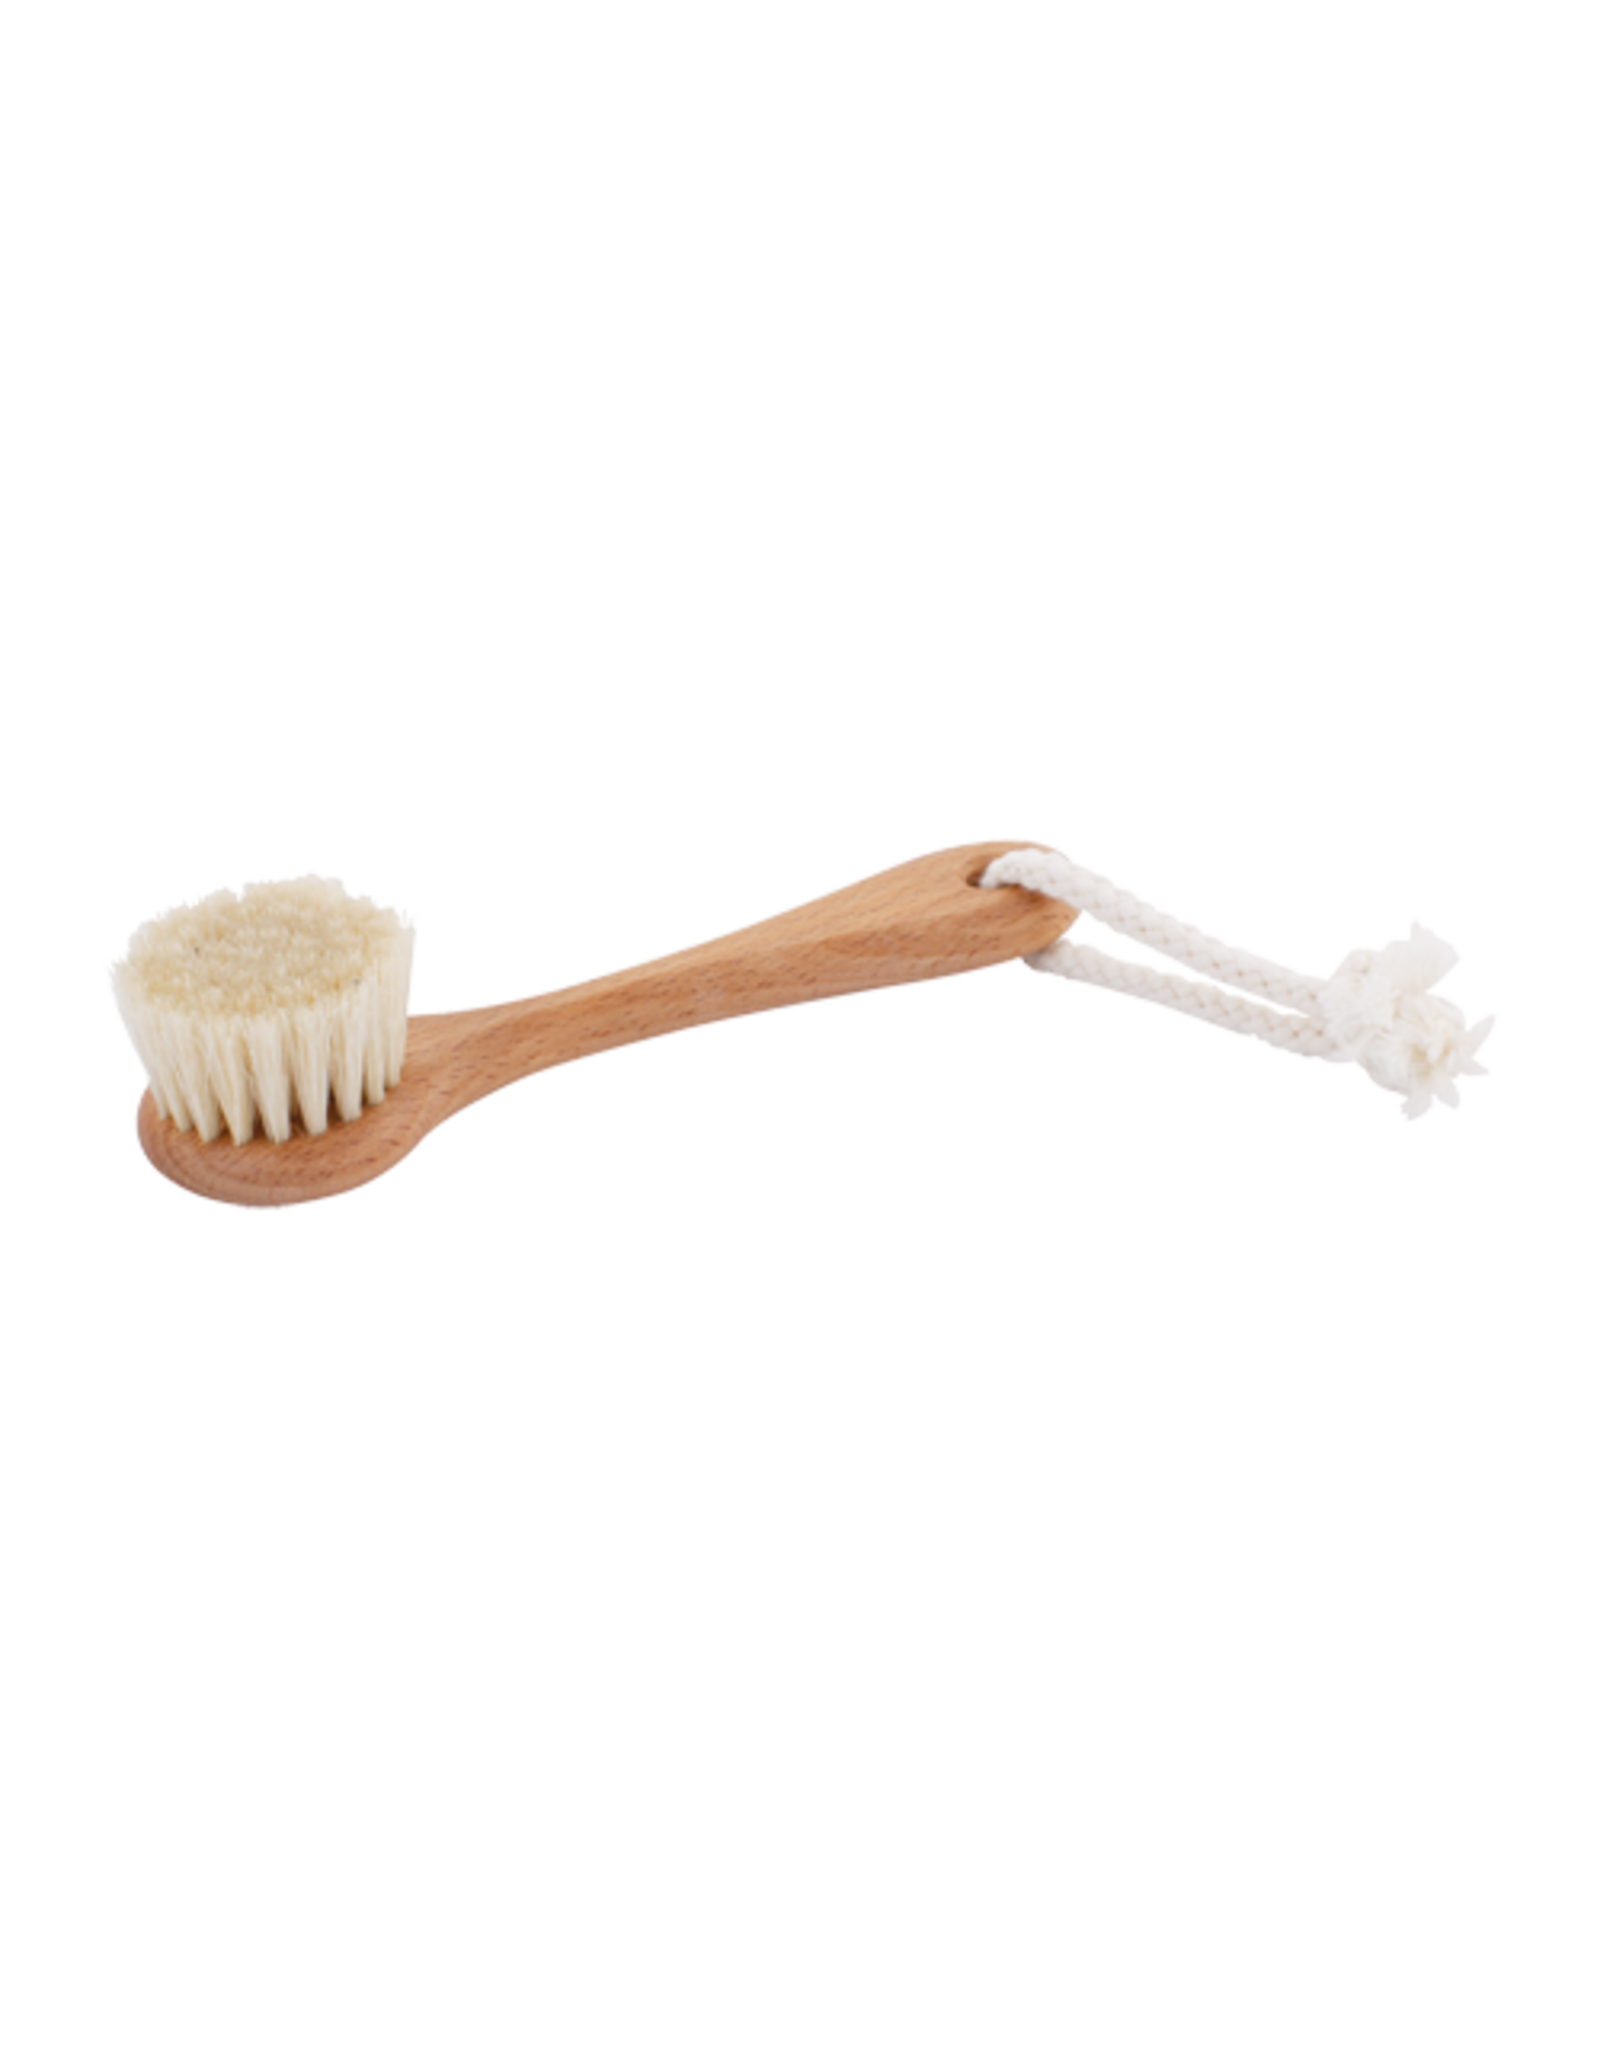 Redecker Face Brush with Handle